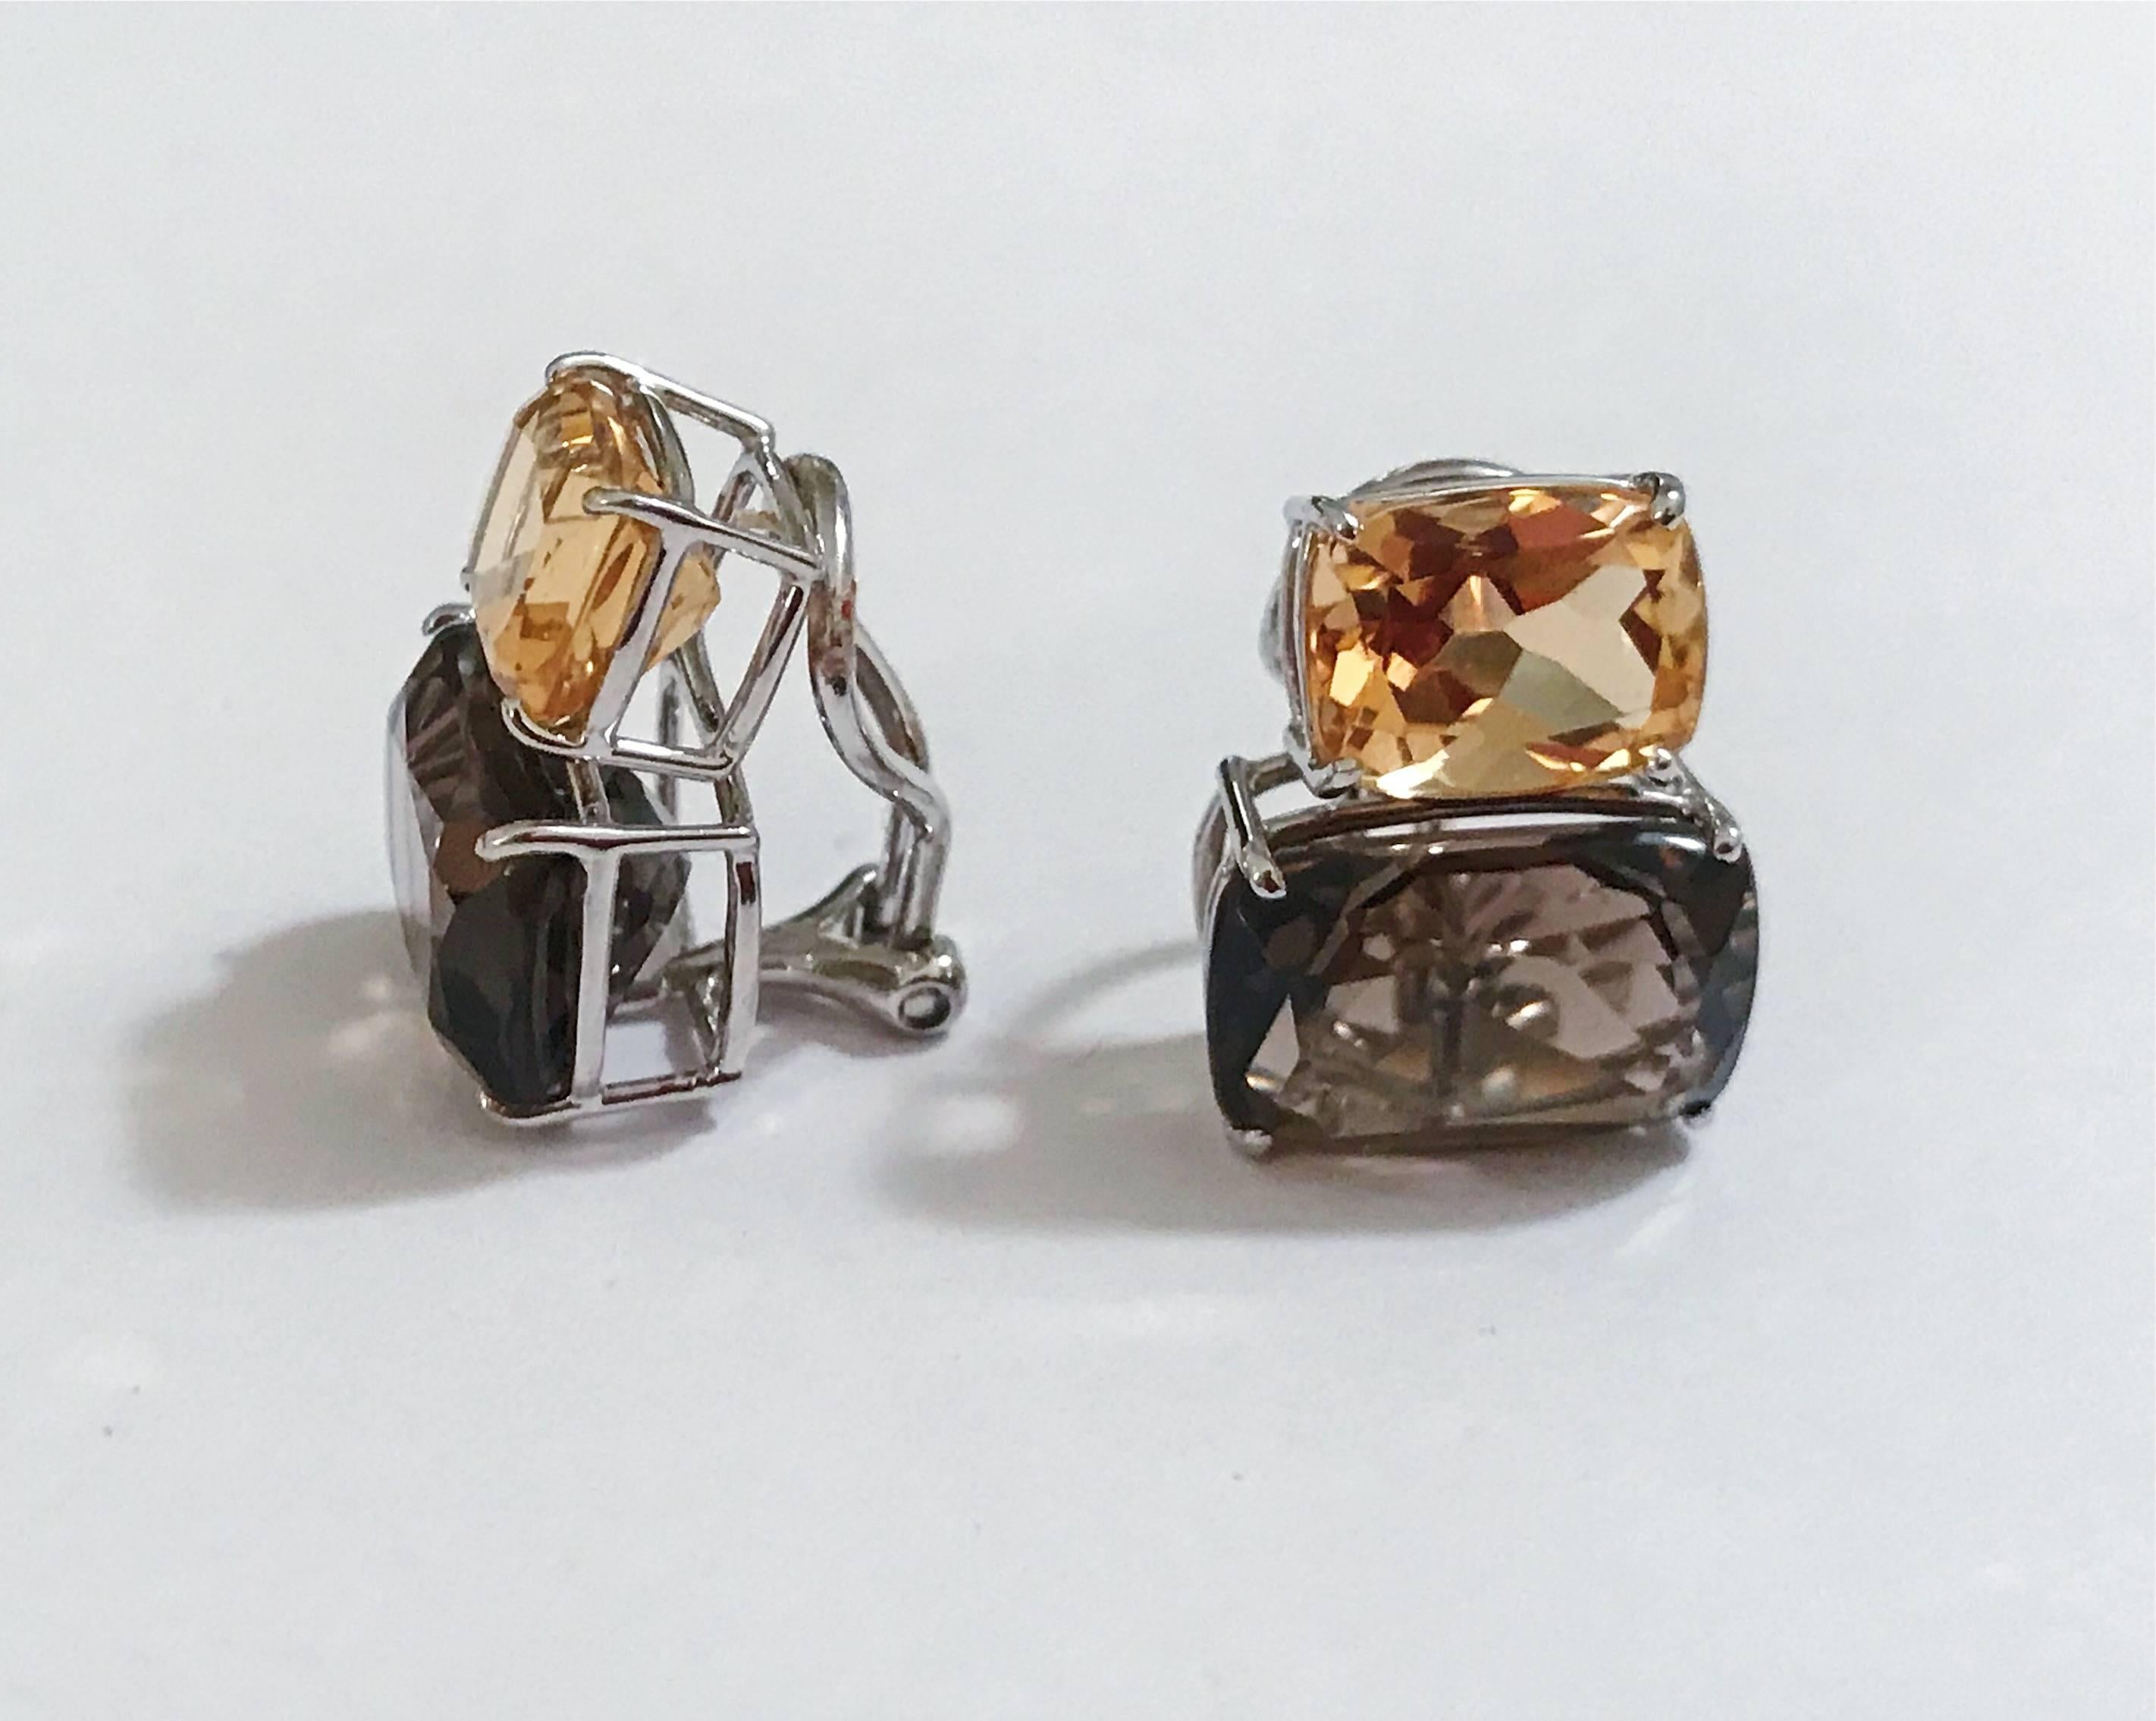 Elegant 18kt White Gold Double Cushion Earrings with Faceted Citrine and Smokey Topaz.

This is a classic day to evening earring that can be made clip or pierced. The meaning measures 3/4' tall and 1/2